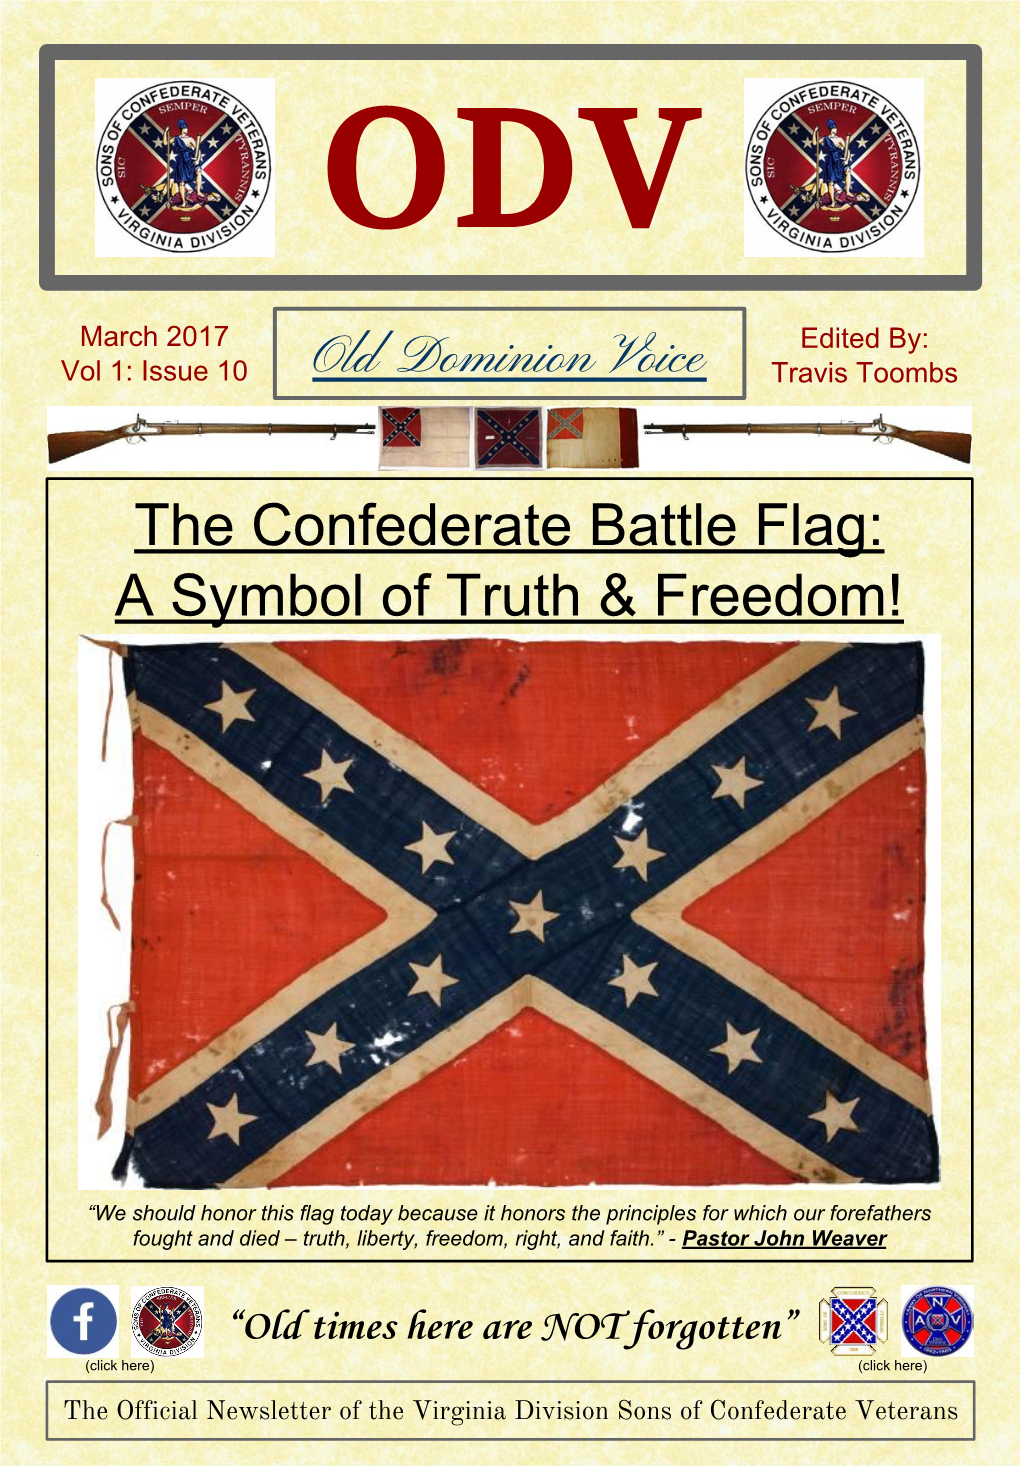 The Confederate Battle Flag: a Symbol of Truth & Freedom!